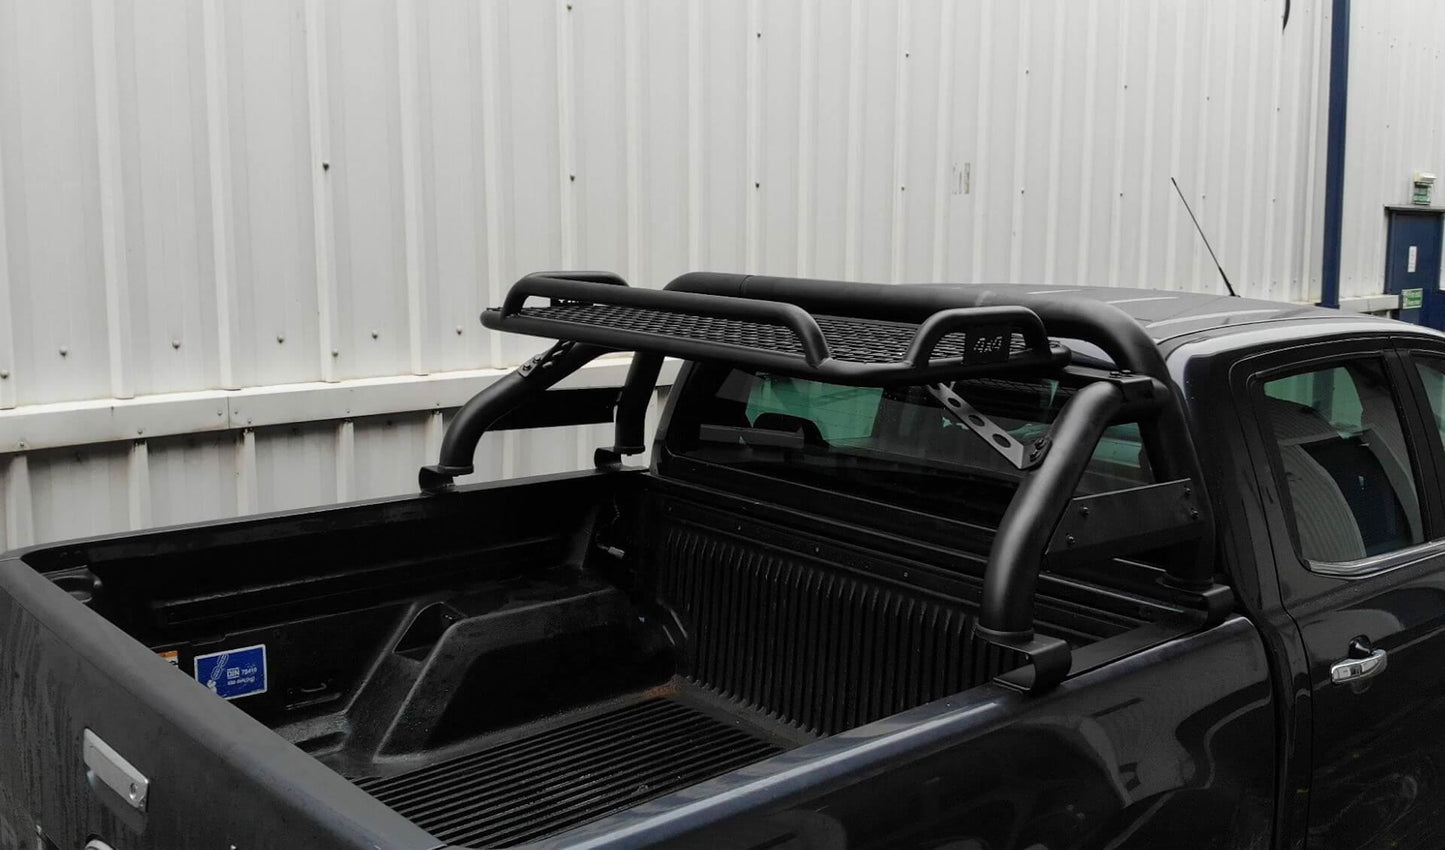 Black SUS201 Short Arm Roll Bar with Cargo Basket Rack for the Ford Ranger 06-12